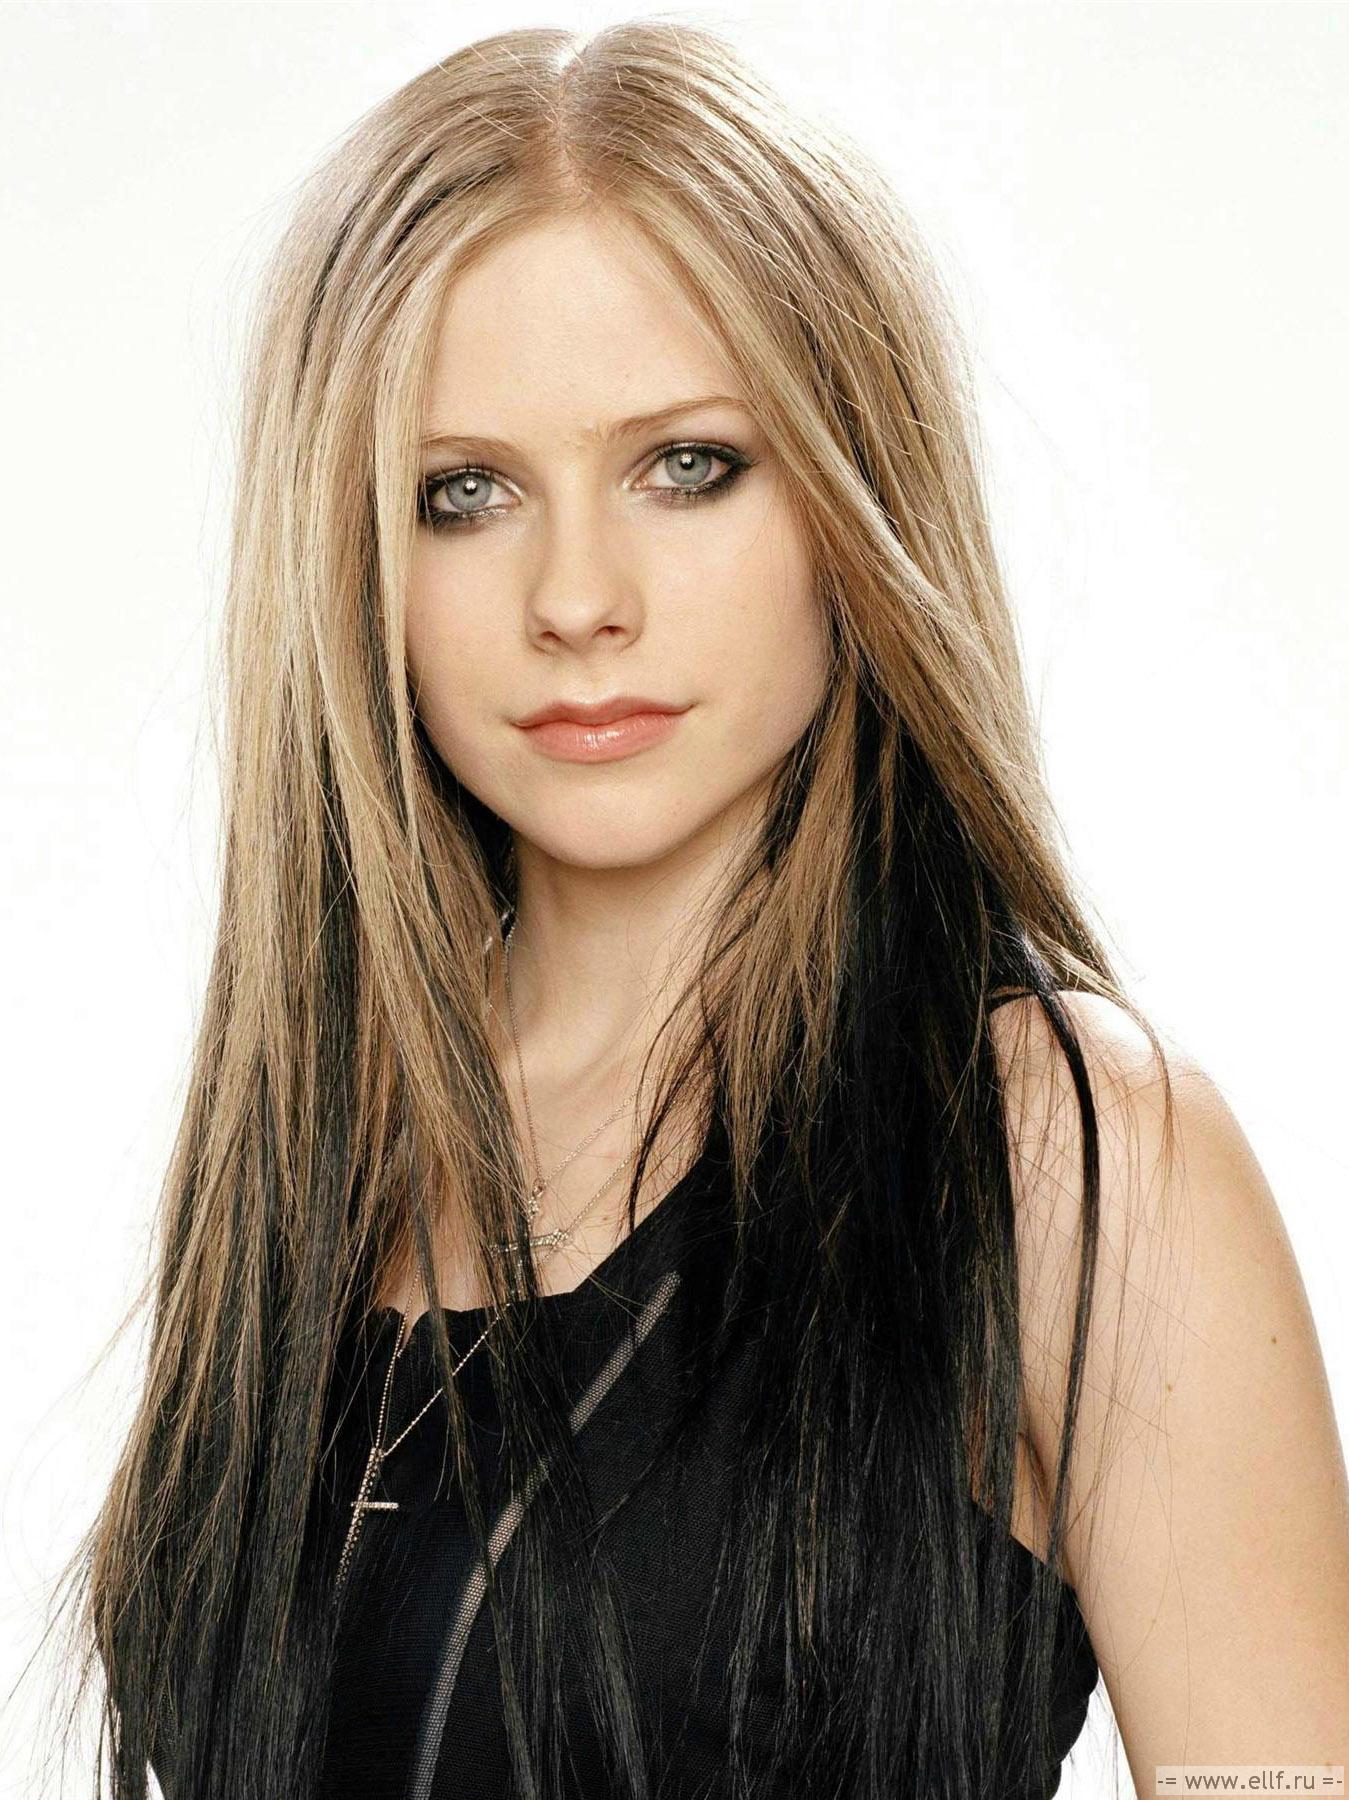 Nice Images Collection: Avril Lavigne Desktop Wallpapers